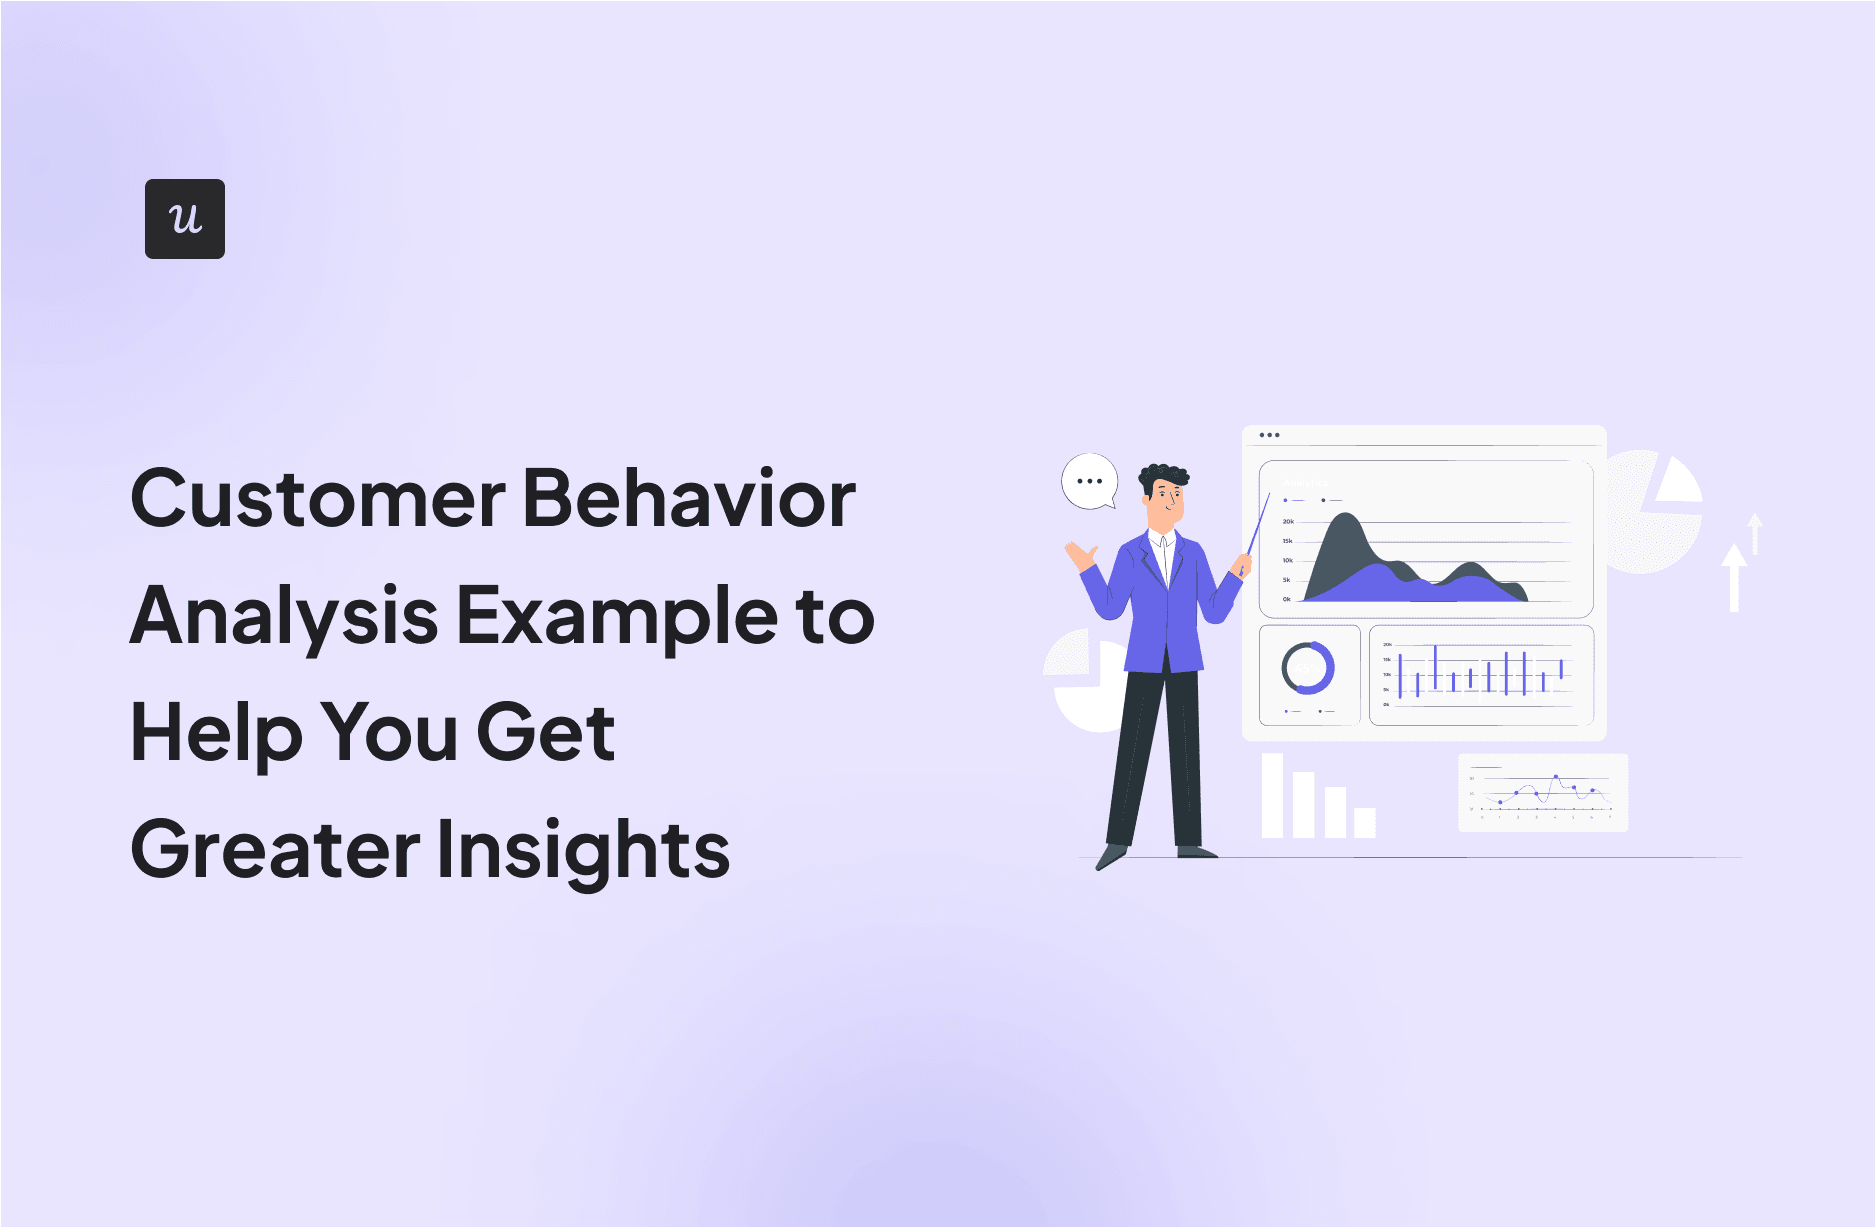 Customer Behavior Analysis Example to Help You Get Greater Insights cover